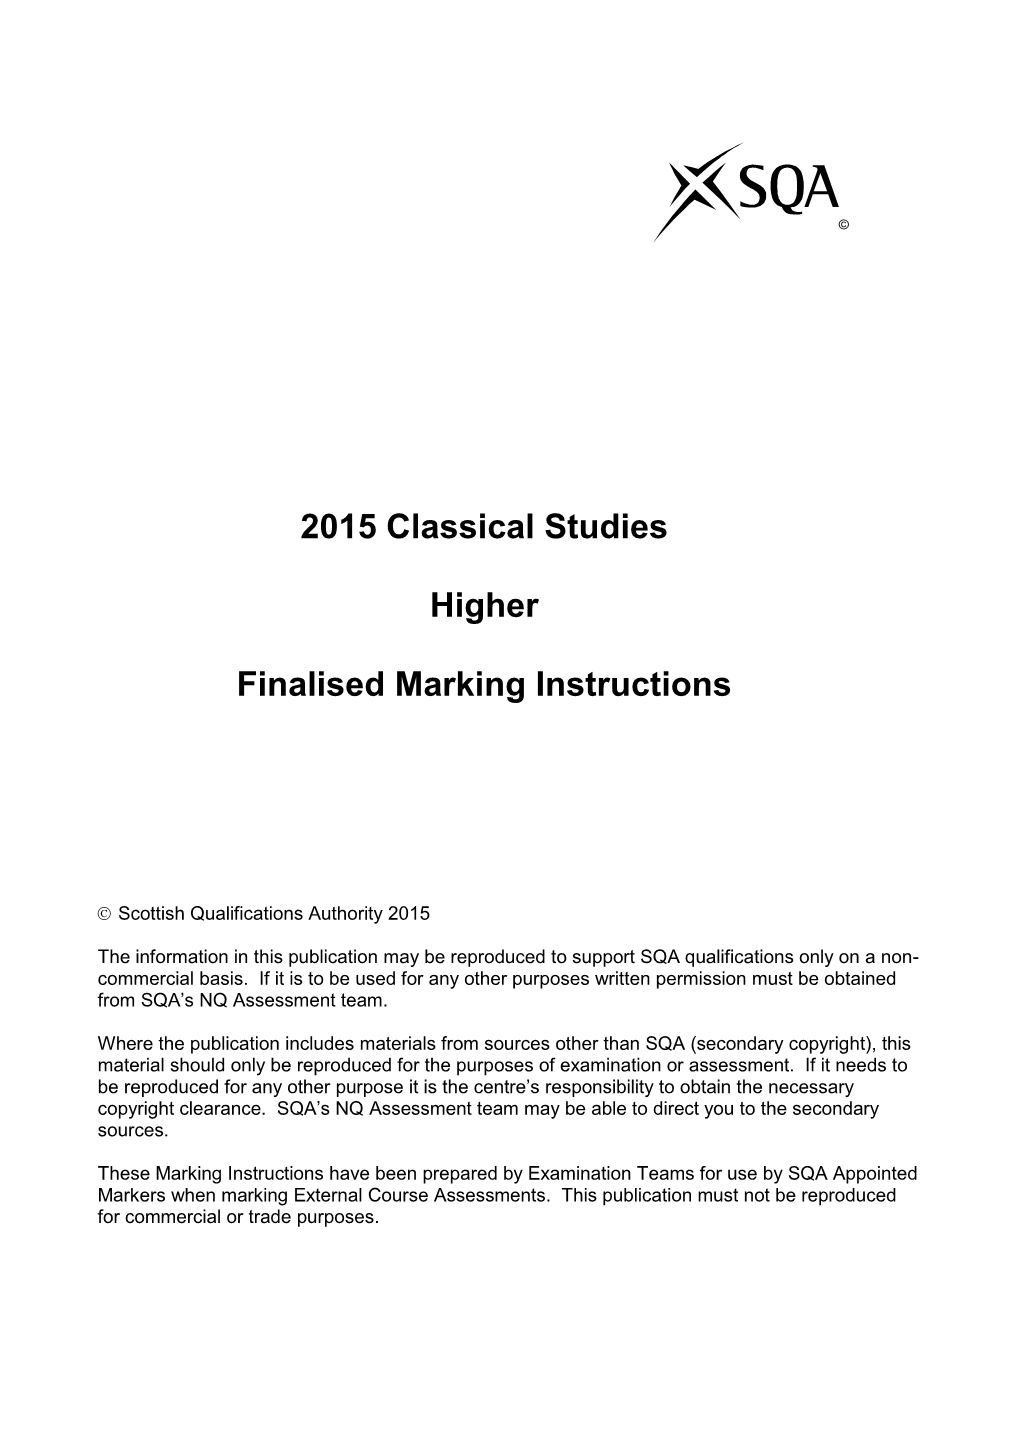 2015 Classical Studies Higher Finalised Marking Instructions